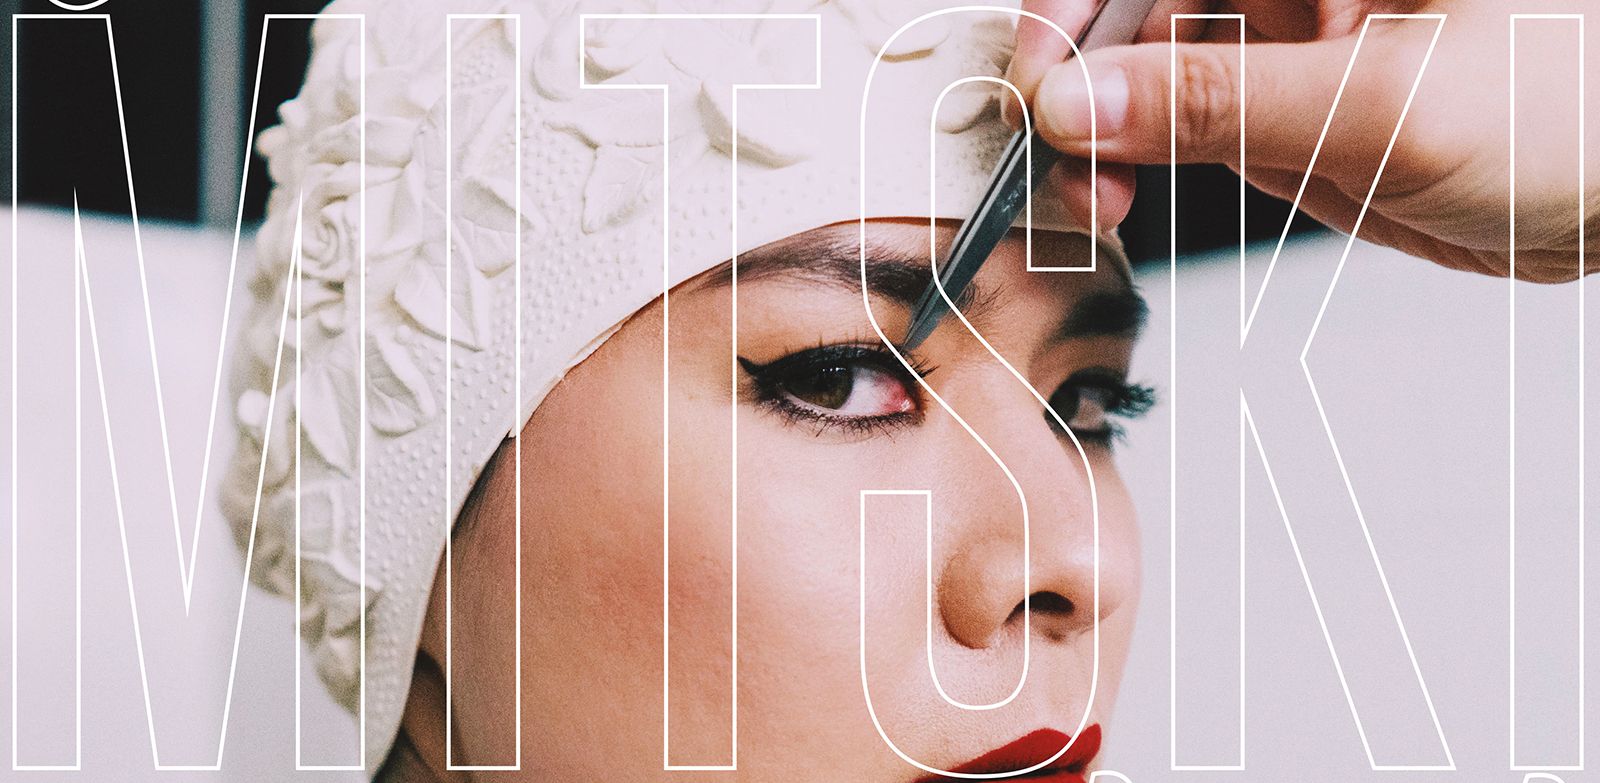 Mitski shines once again with ‘Be the Cowboy’